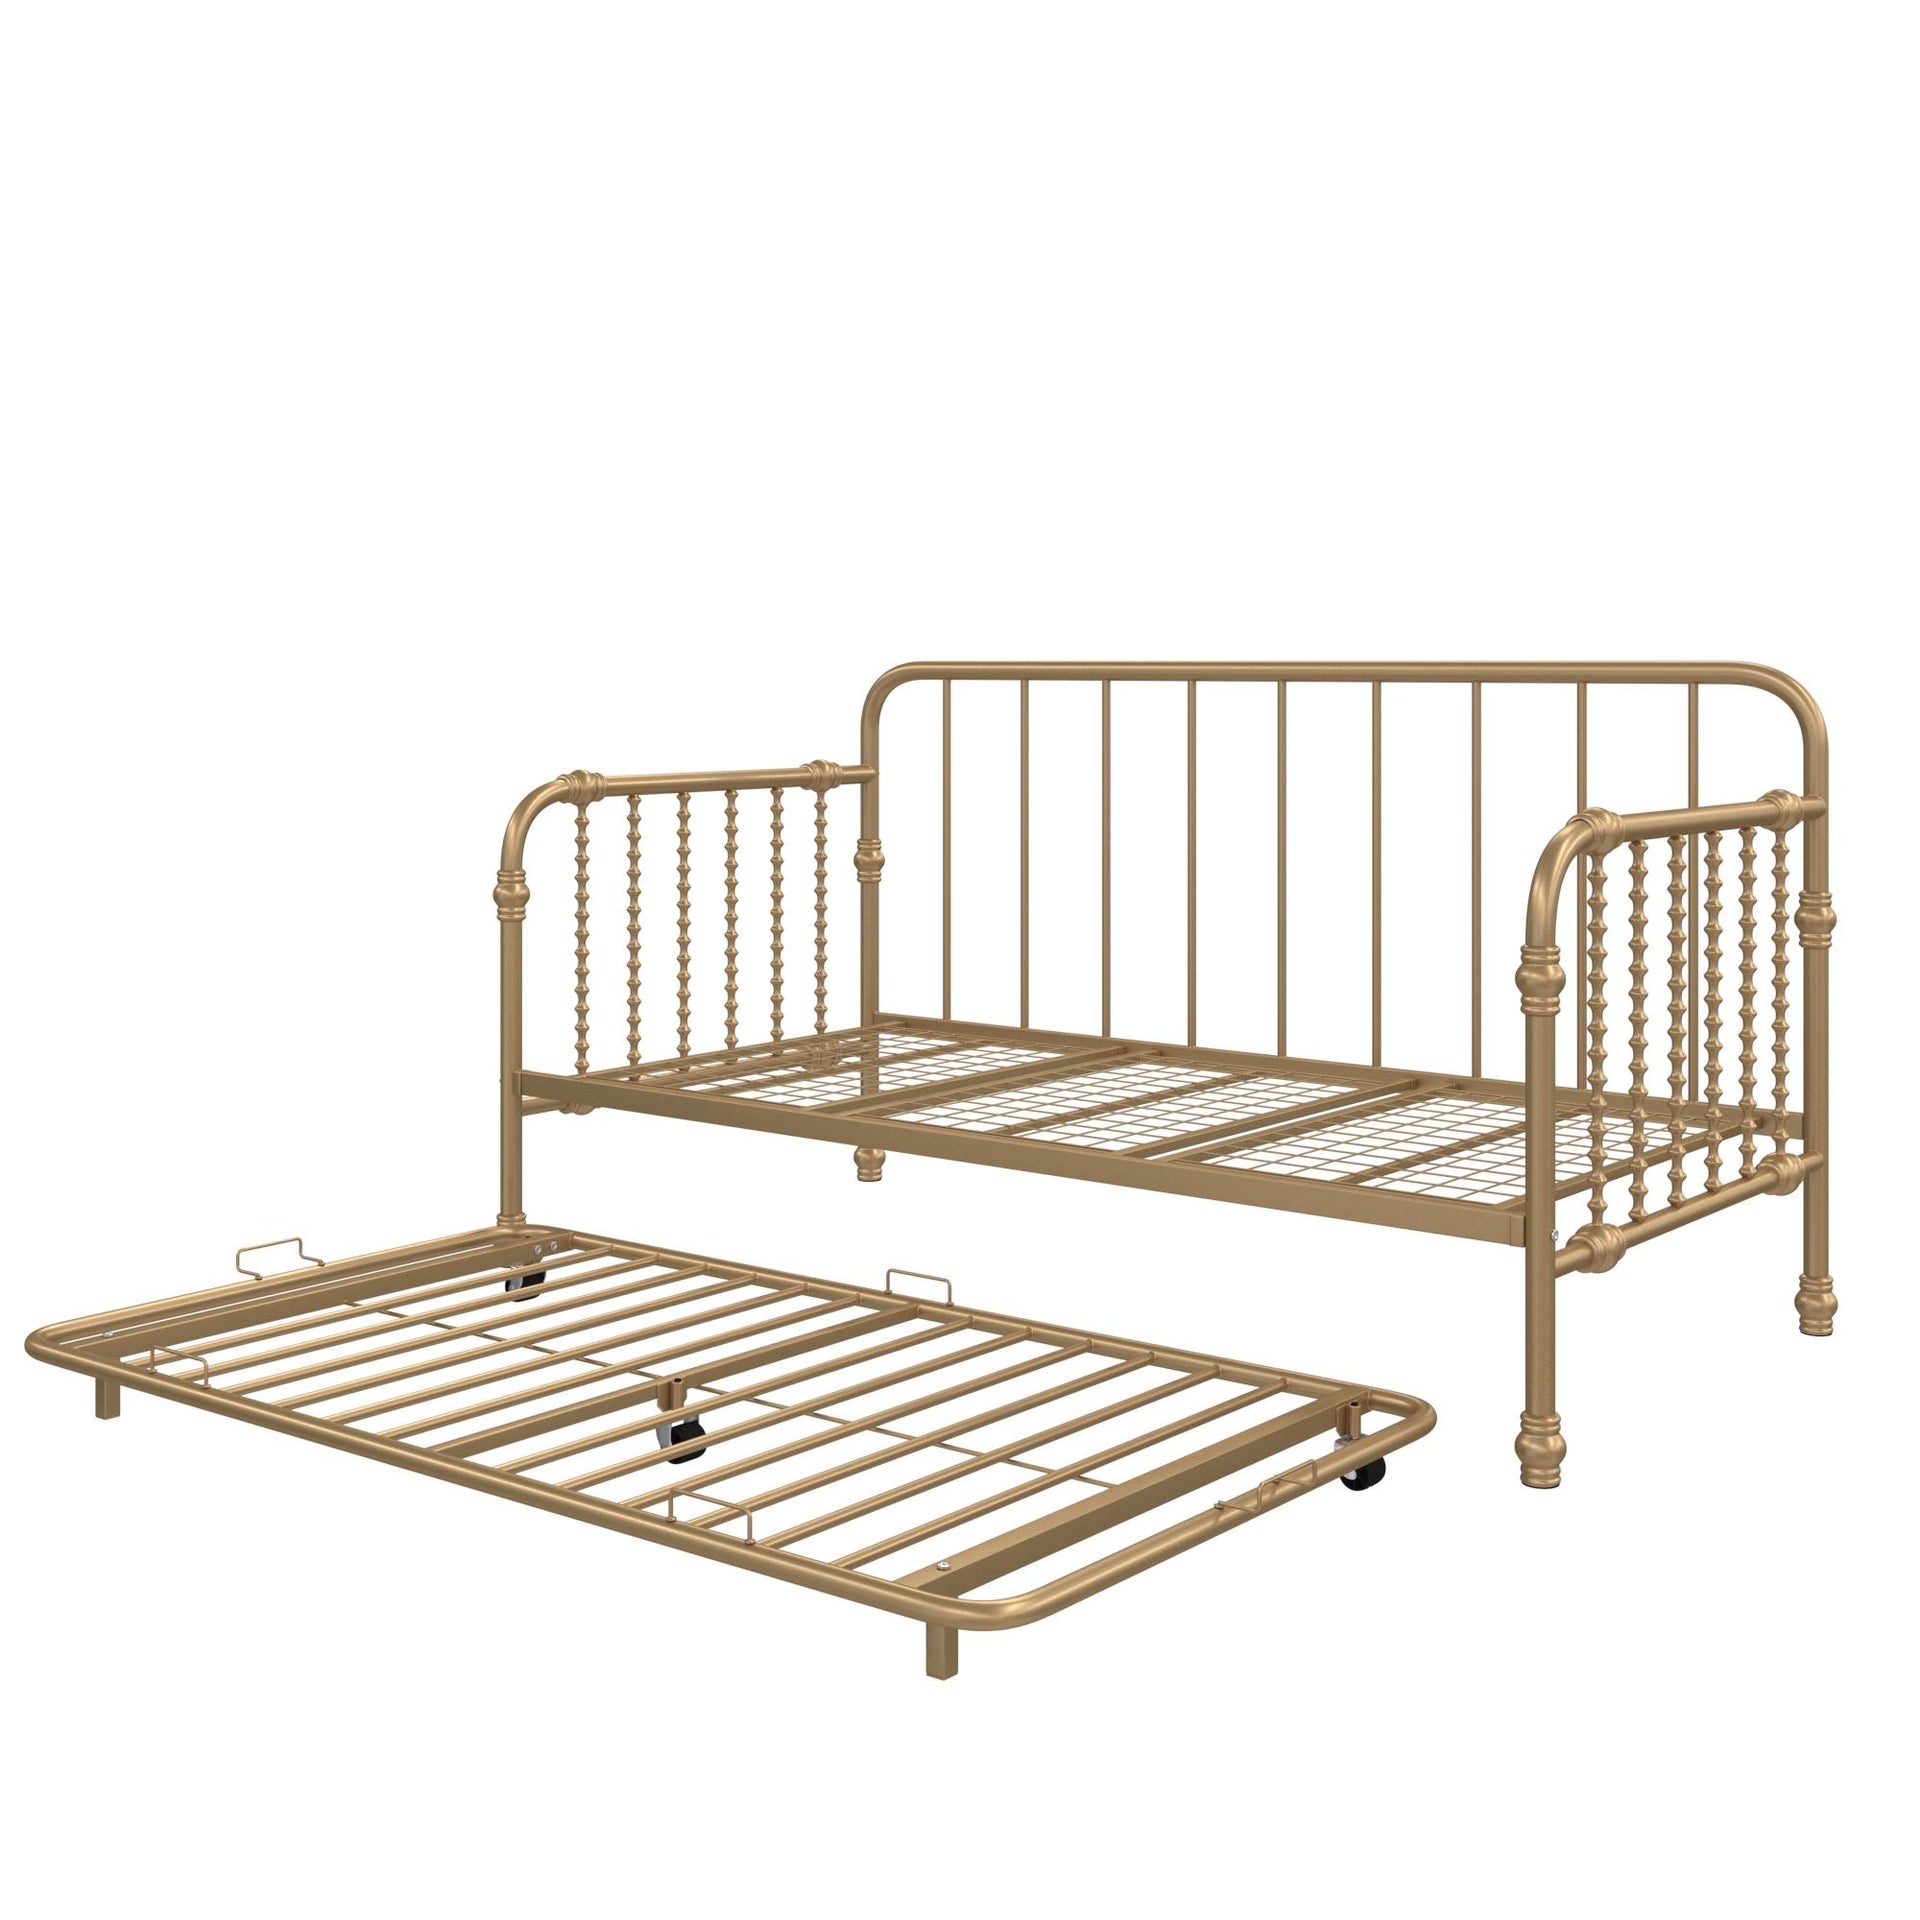 Little Seeds Monarch Hill Wren Metal Daybed with Trundle - Gold - Twin